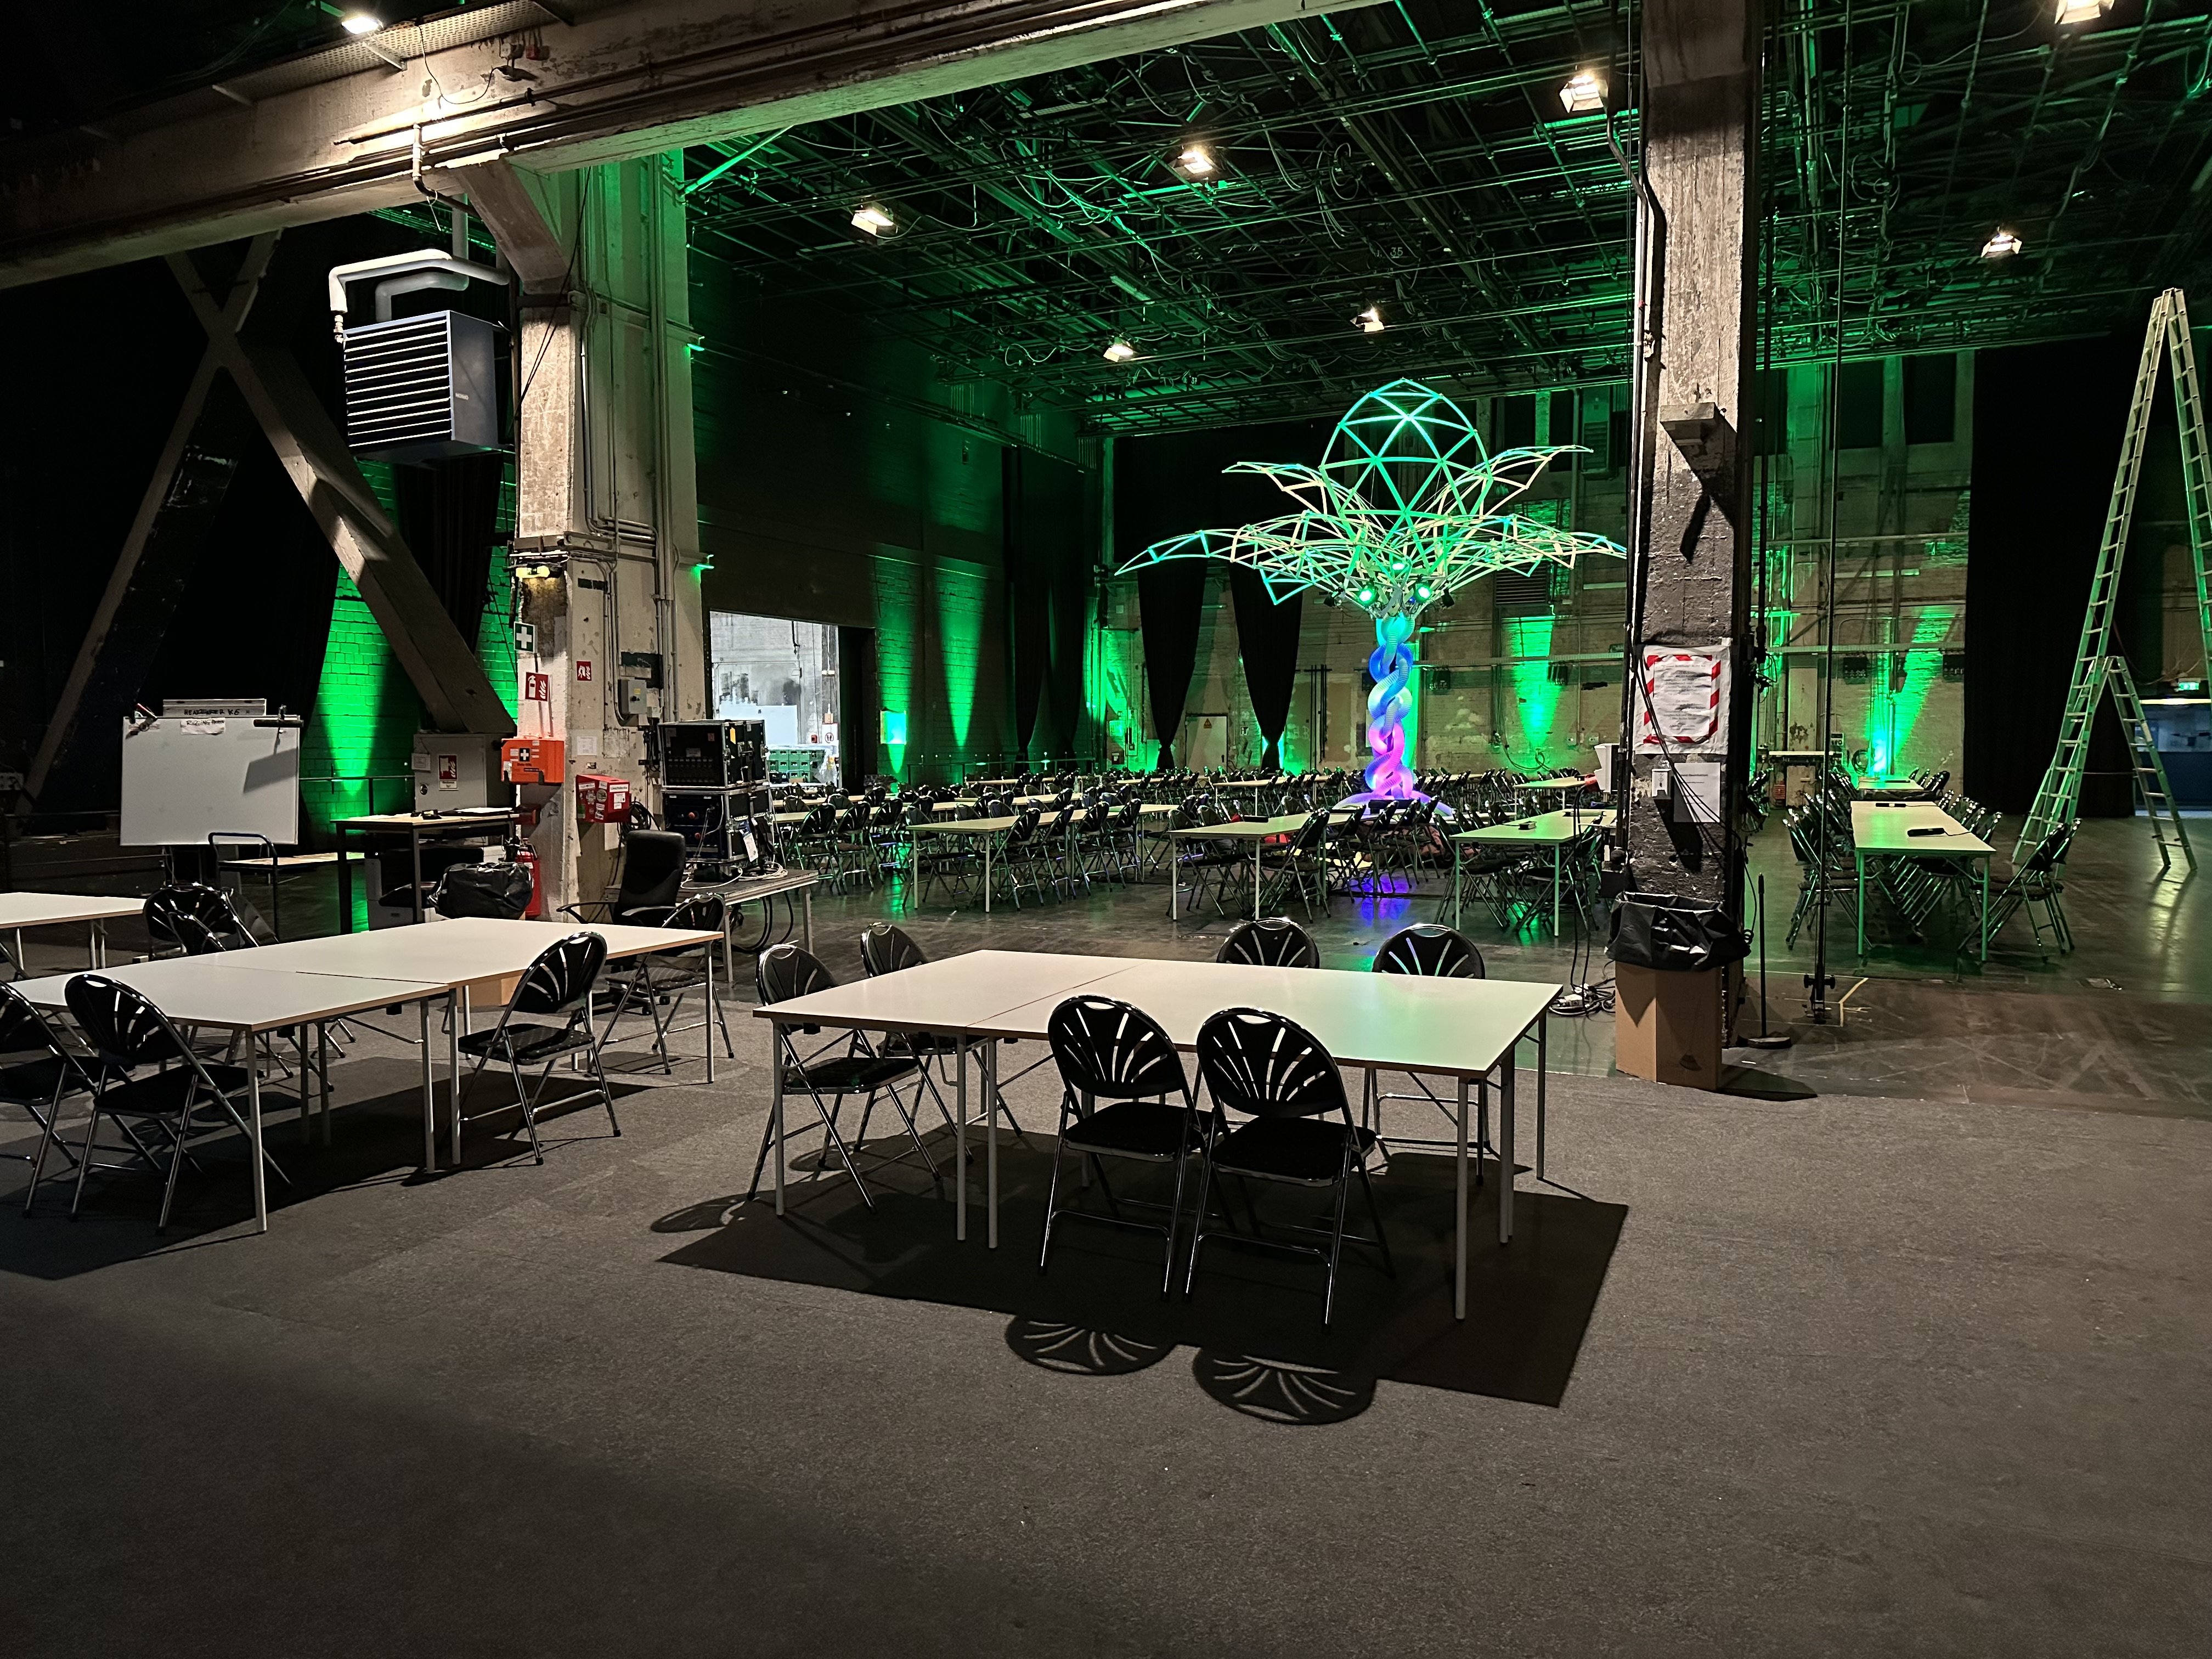 The main Easterhegg 2023 hackcenter. The evening before the event, empty.  A hall filled with desks and chairs in groups and rows. There is colourful green lighting and an RGB fake palm tree in the middle. The main lighting is still on.